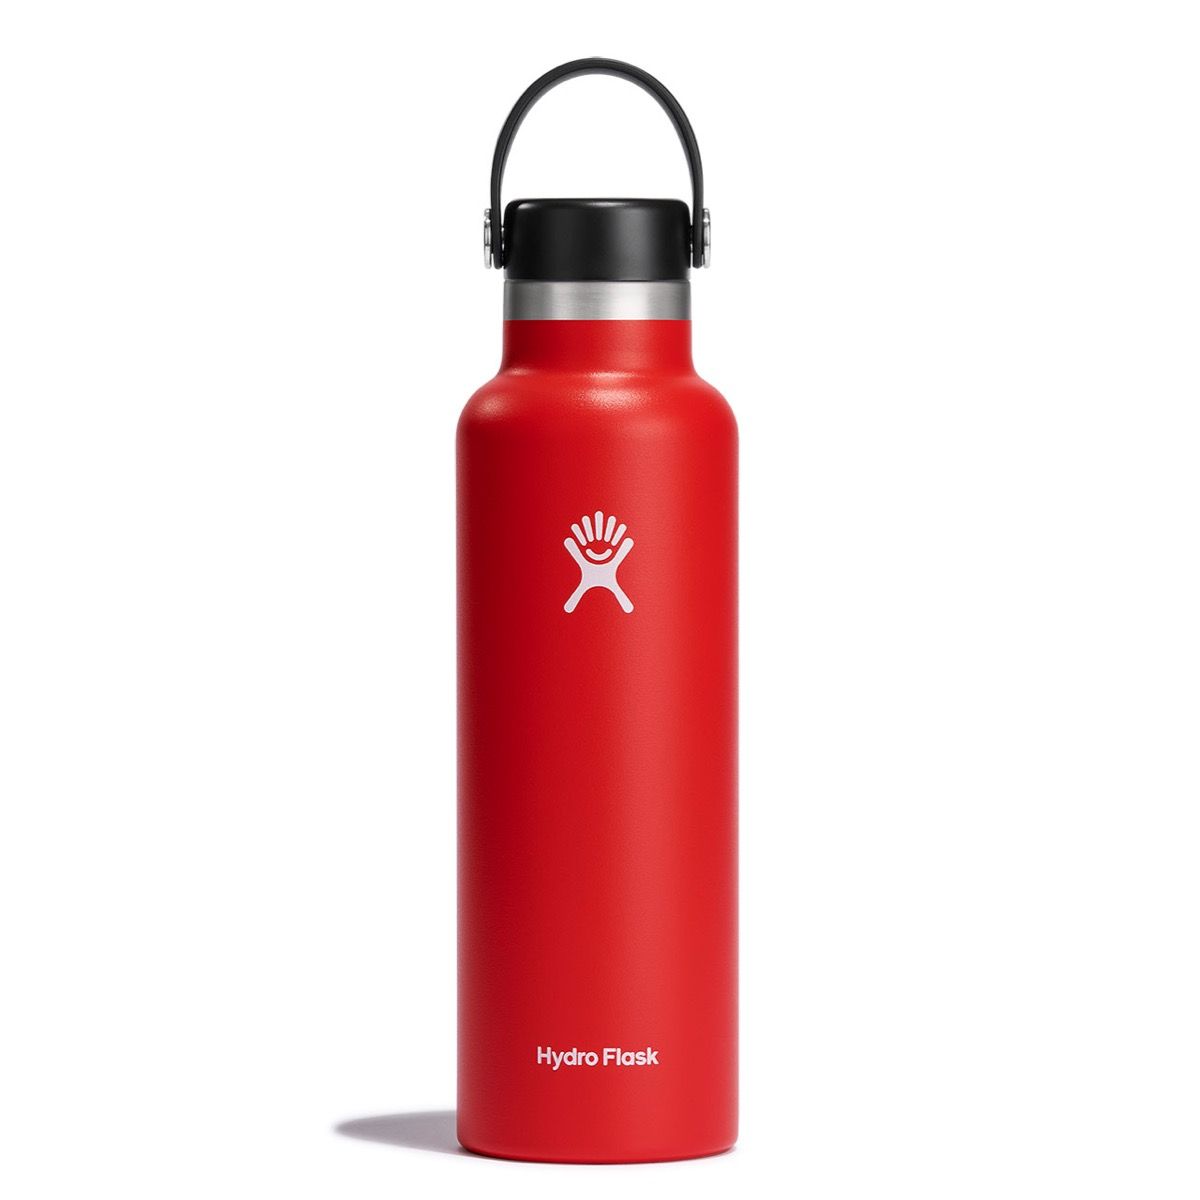 Hydro Flask 21oz Standard Mouth With Flex Cap